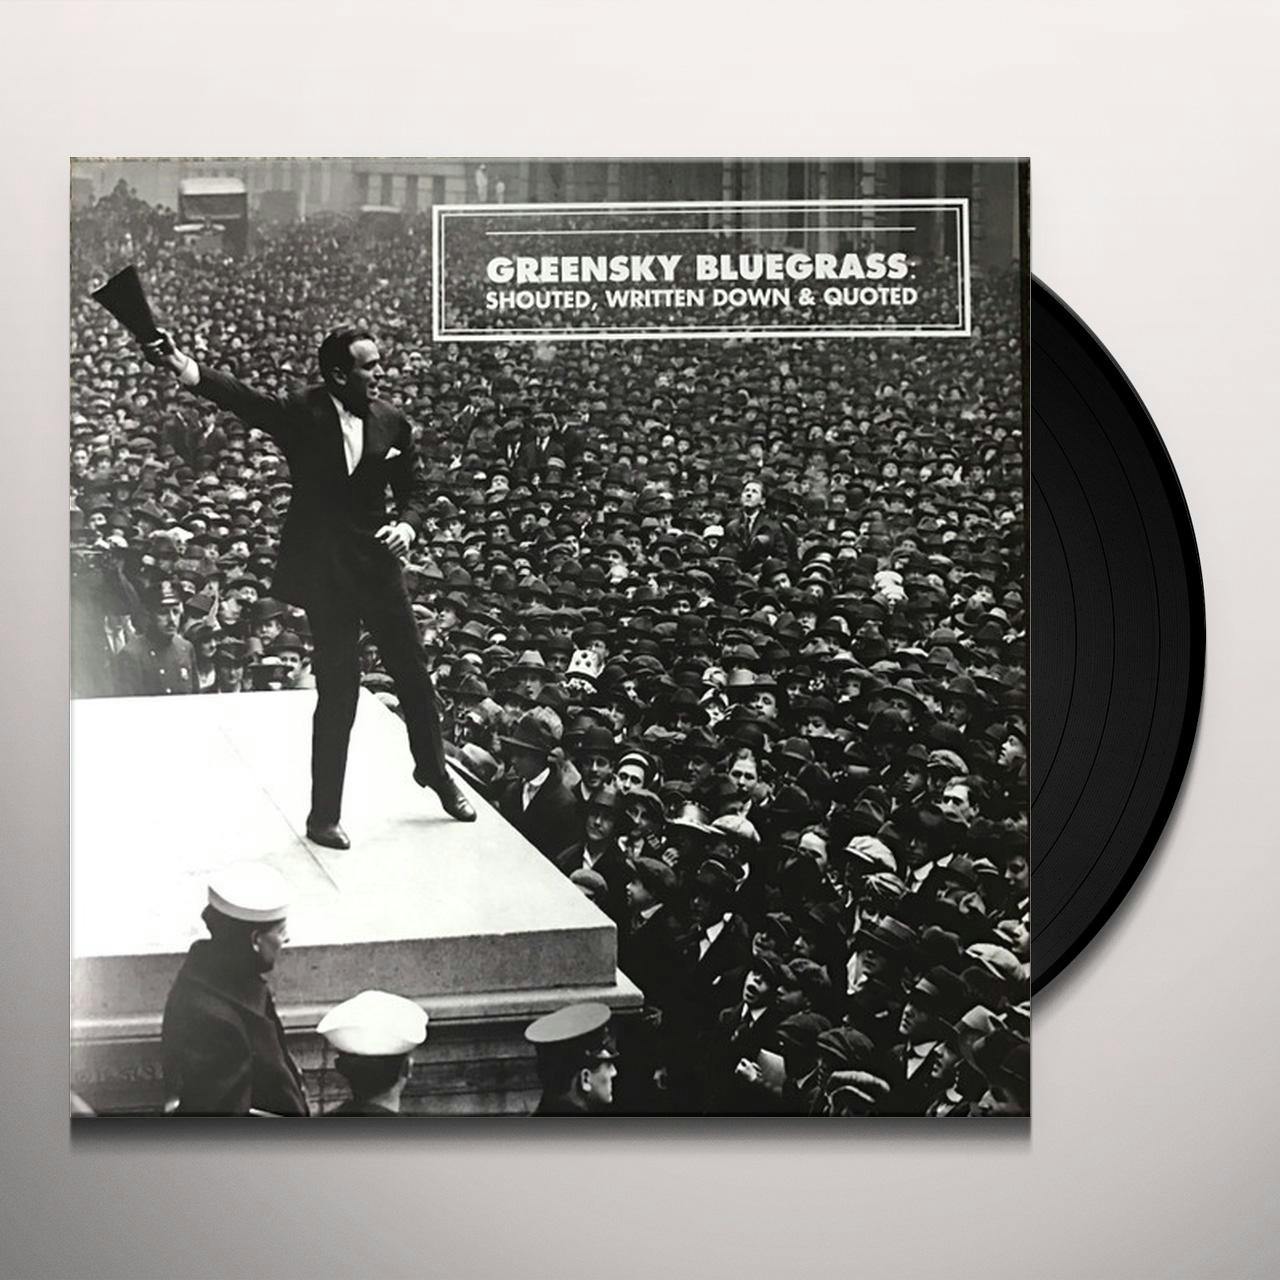 Greensky　QUOTED　Bluegrass　Record　SHOUTED　WRITTEN　DOWN　Vinyl